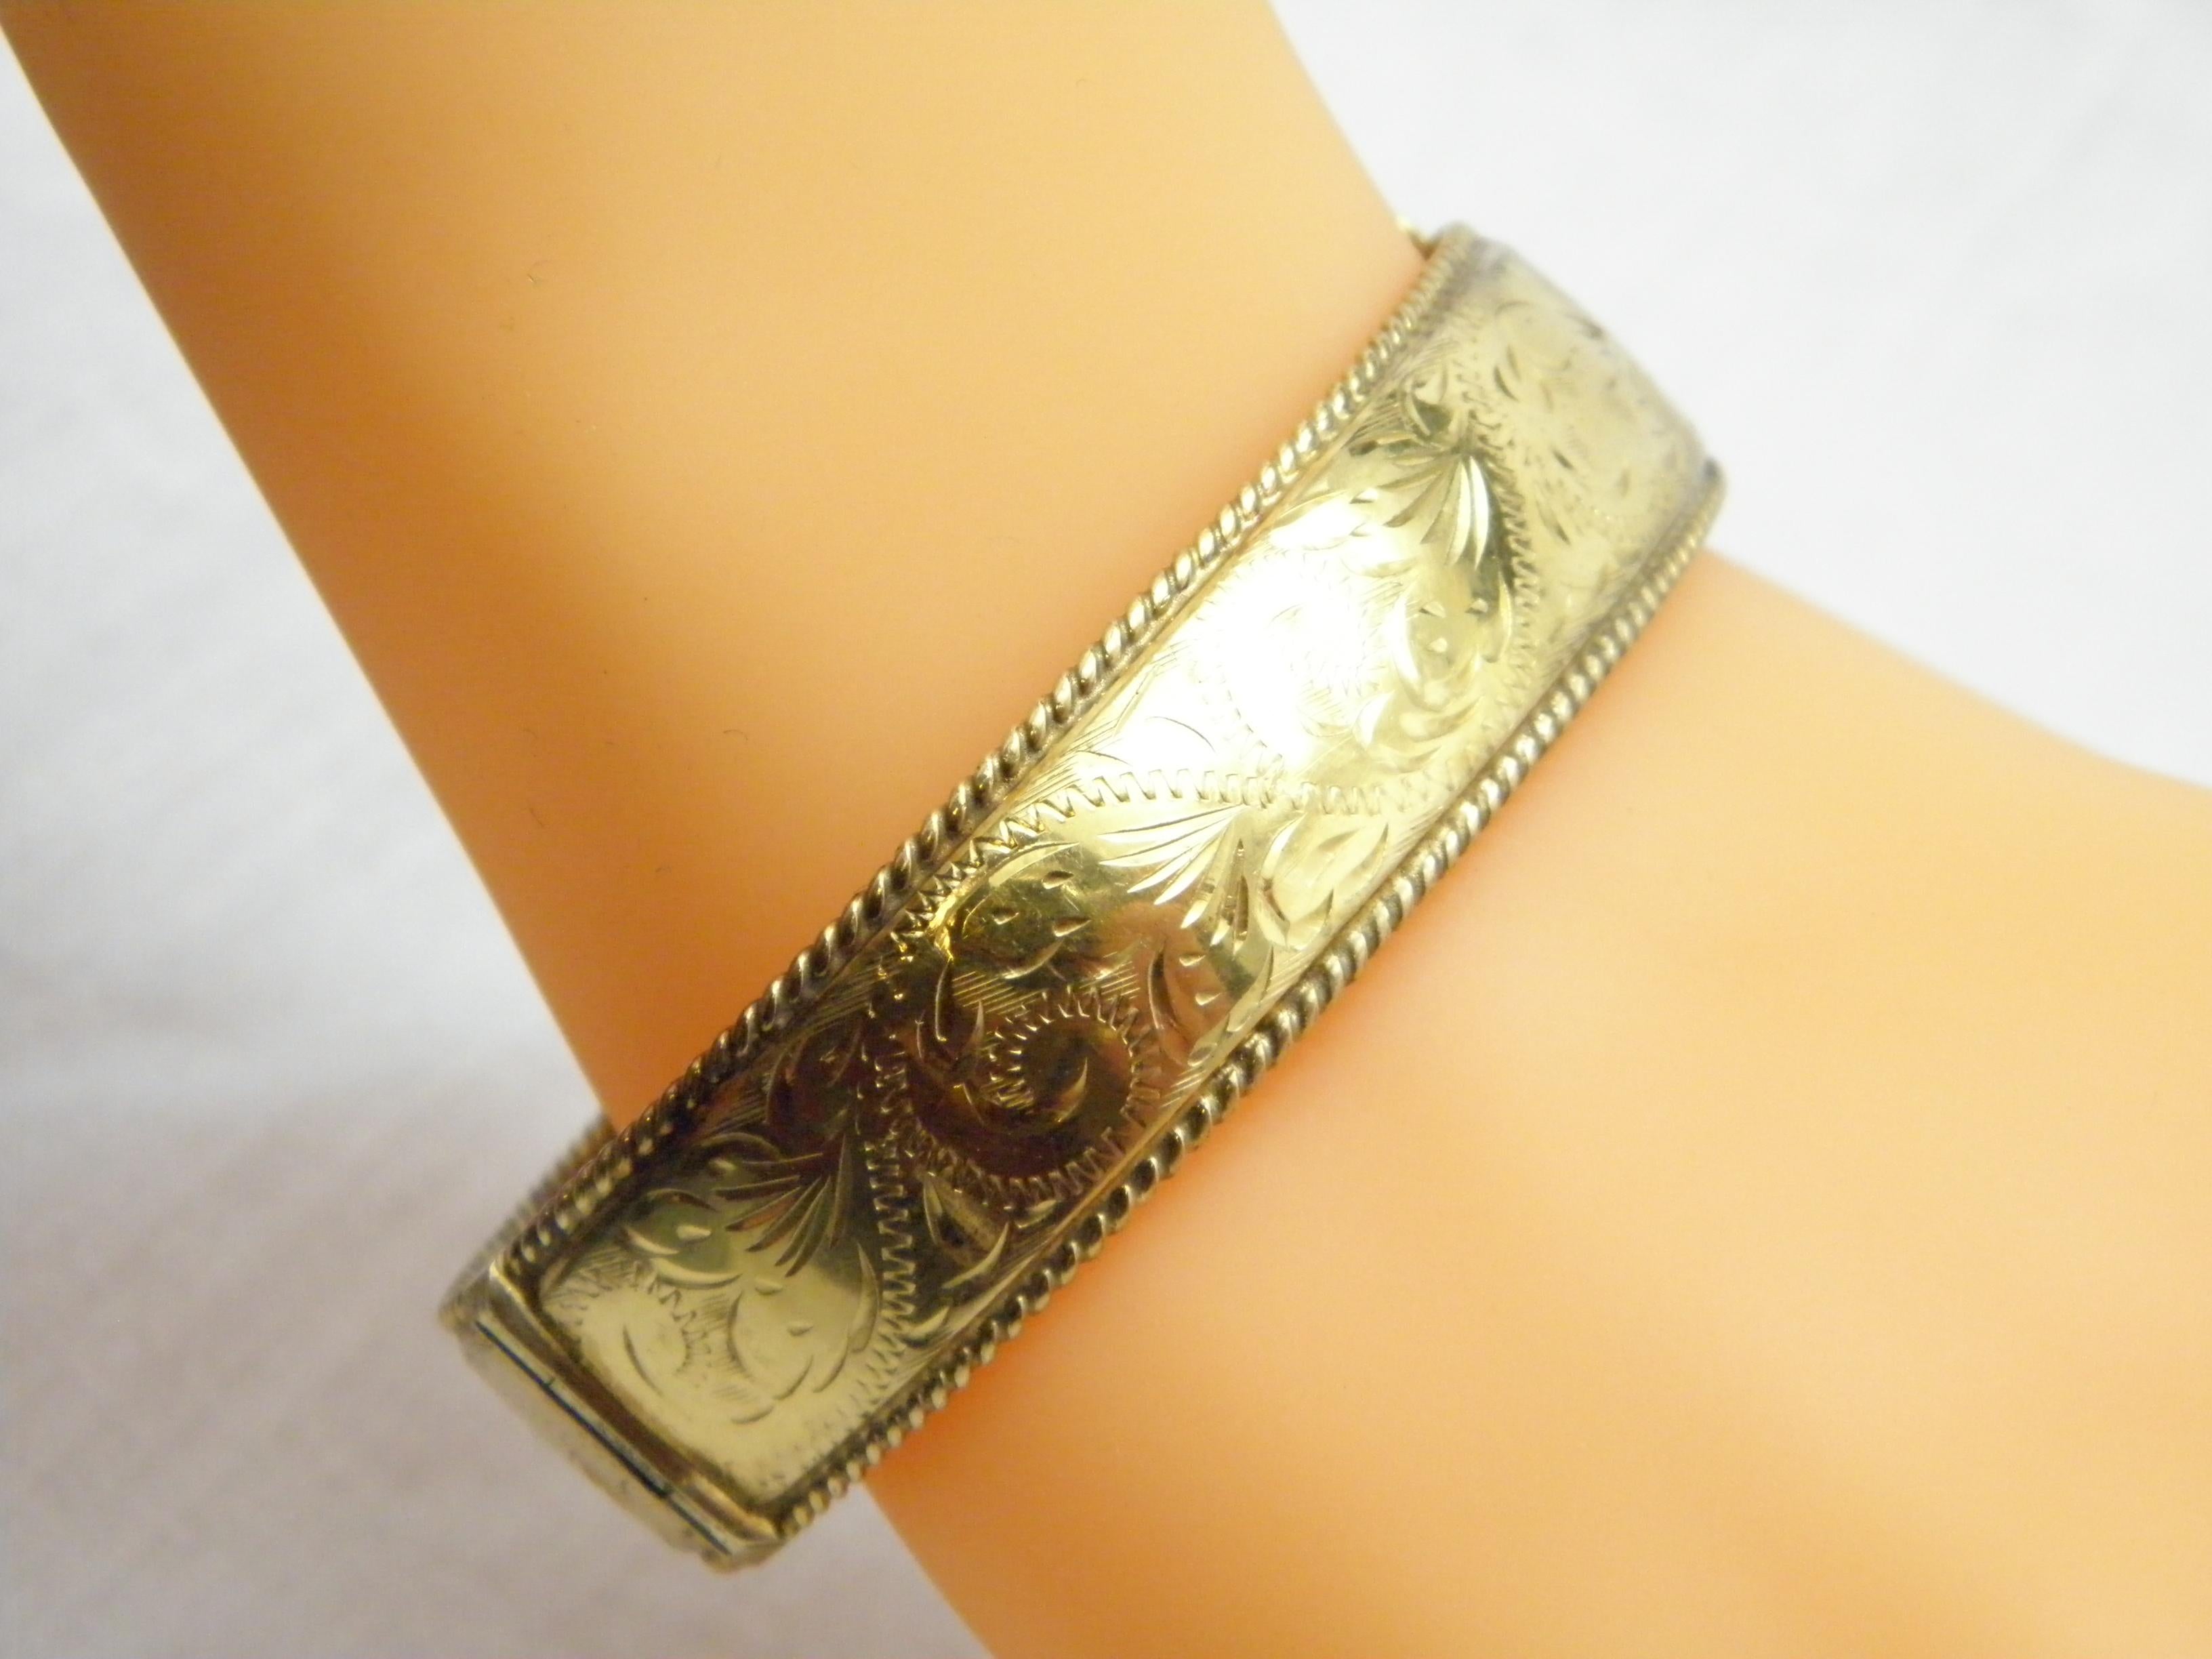 Vintage 9ct Gold 'Rolled' Floral Engraved Cuff Hinged Bracelet Bangle 375 Purity For Sale 2